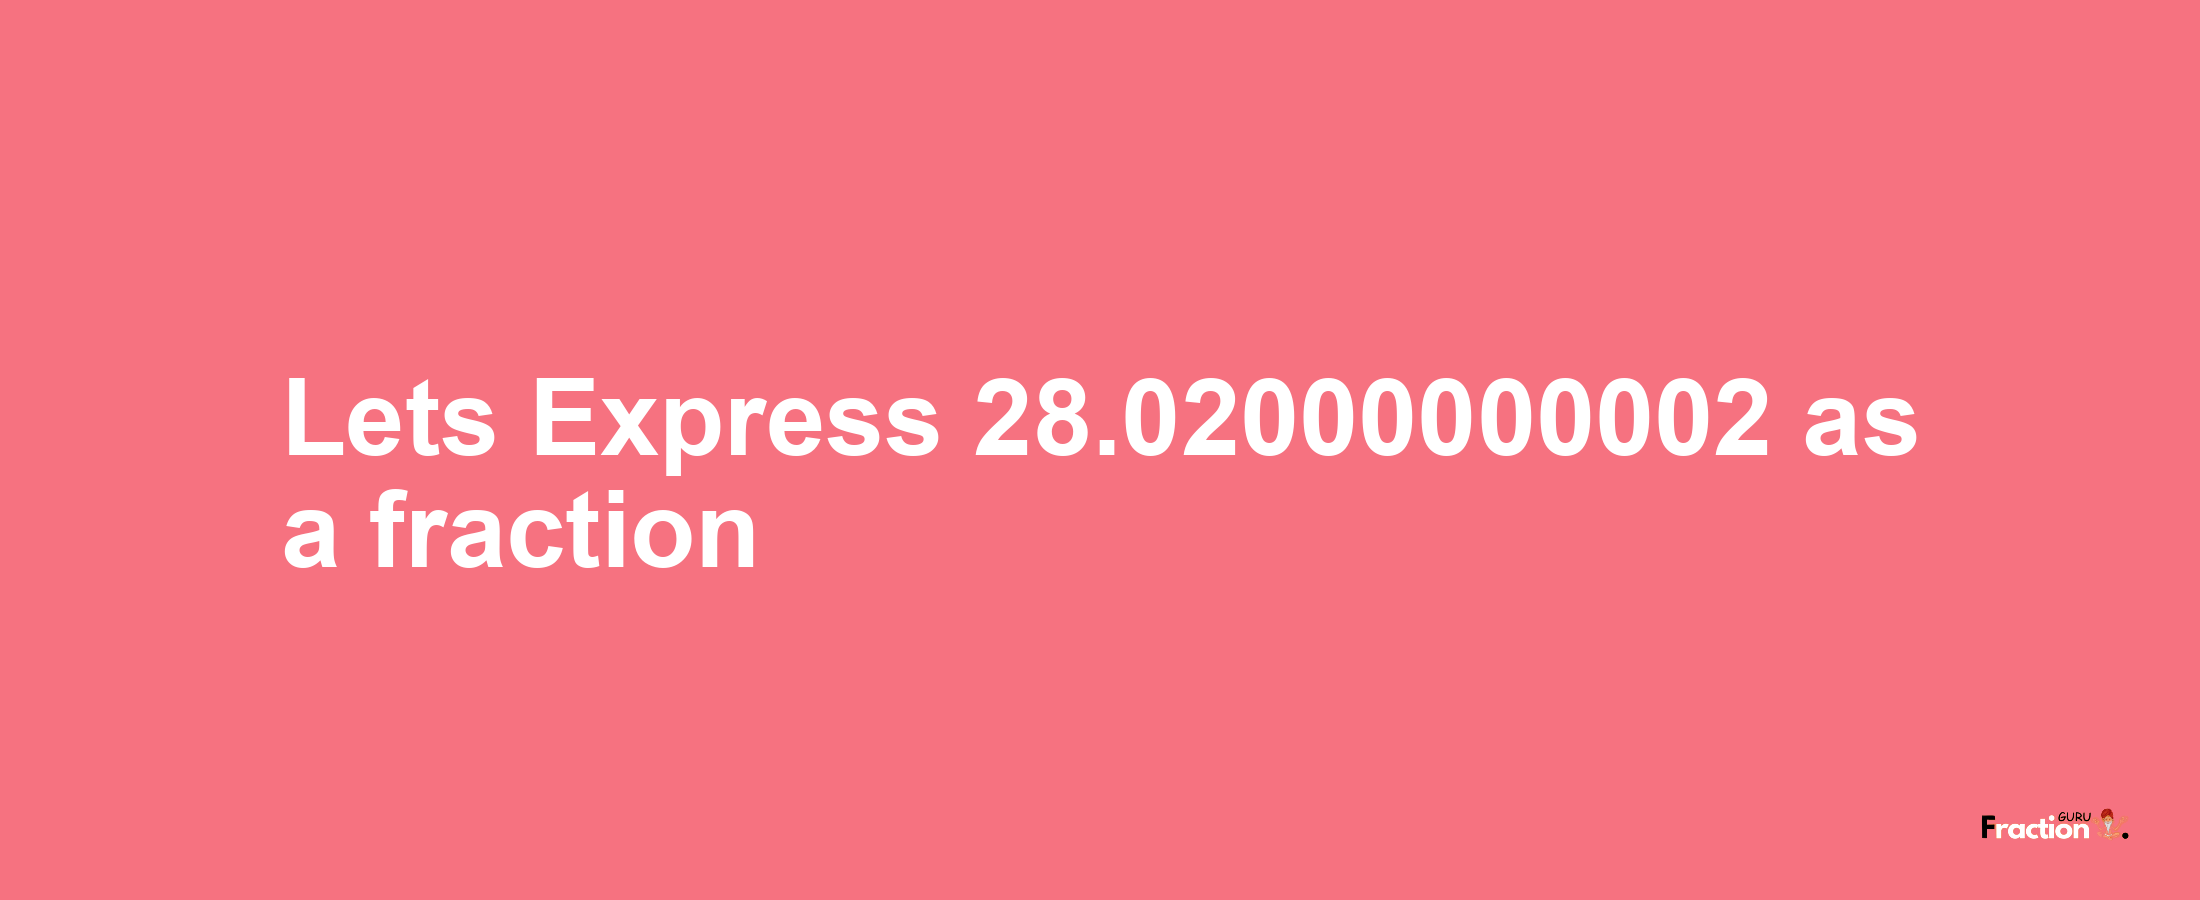 Lets Express 28.02000000002 as afraction